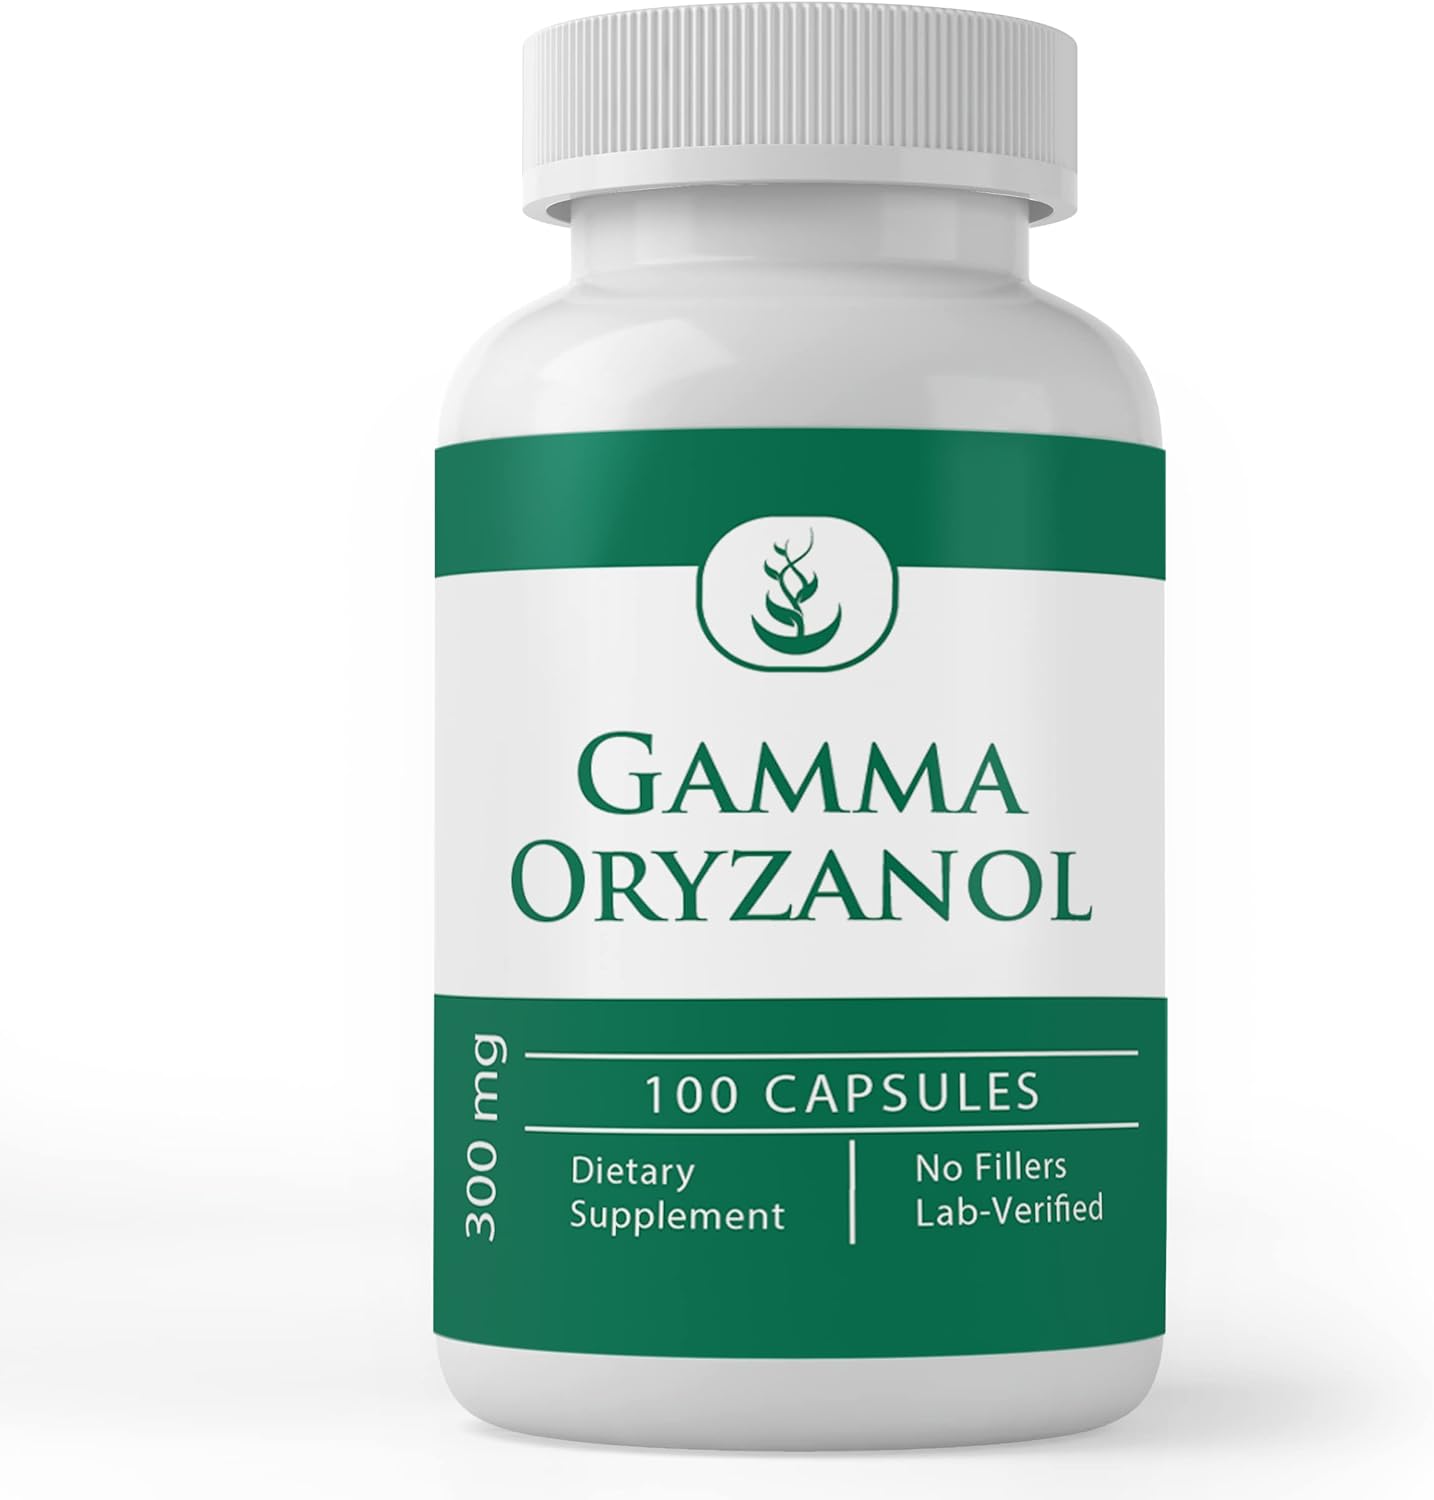 PURE ORIGINAL INGREDIENTS Gamma Oryzanol, (100 Capsules 300mg) Always Pure, No Additives Or Fillers,